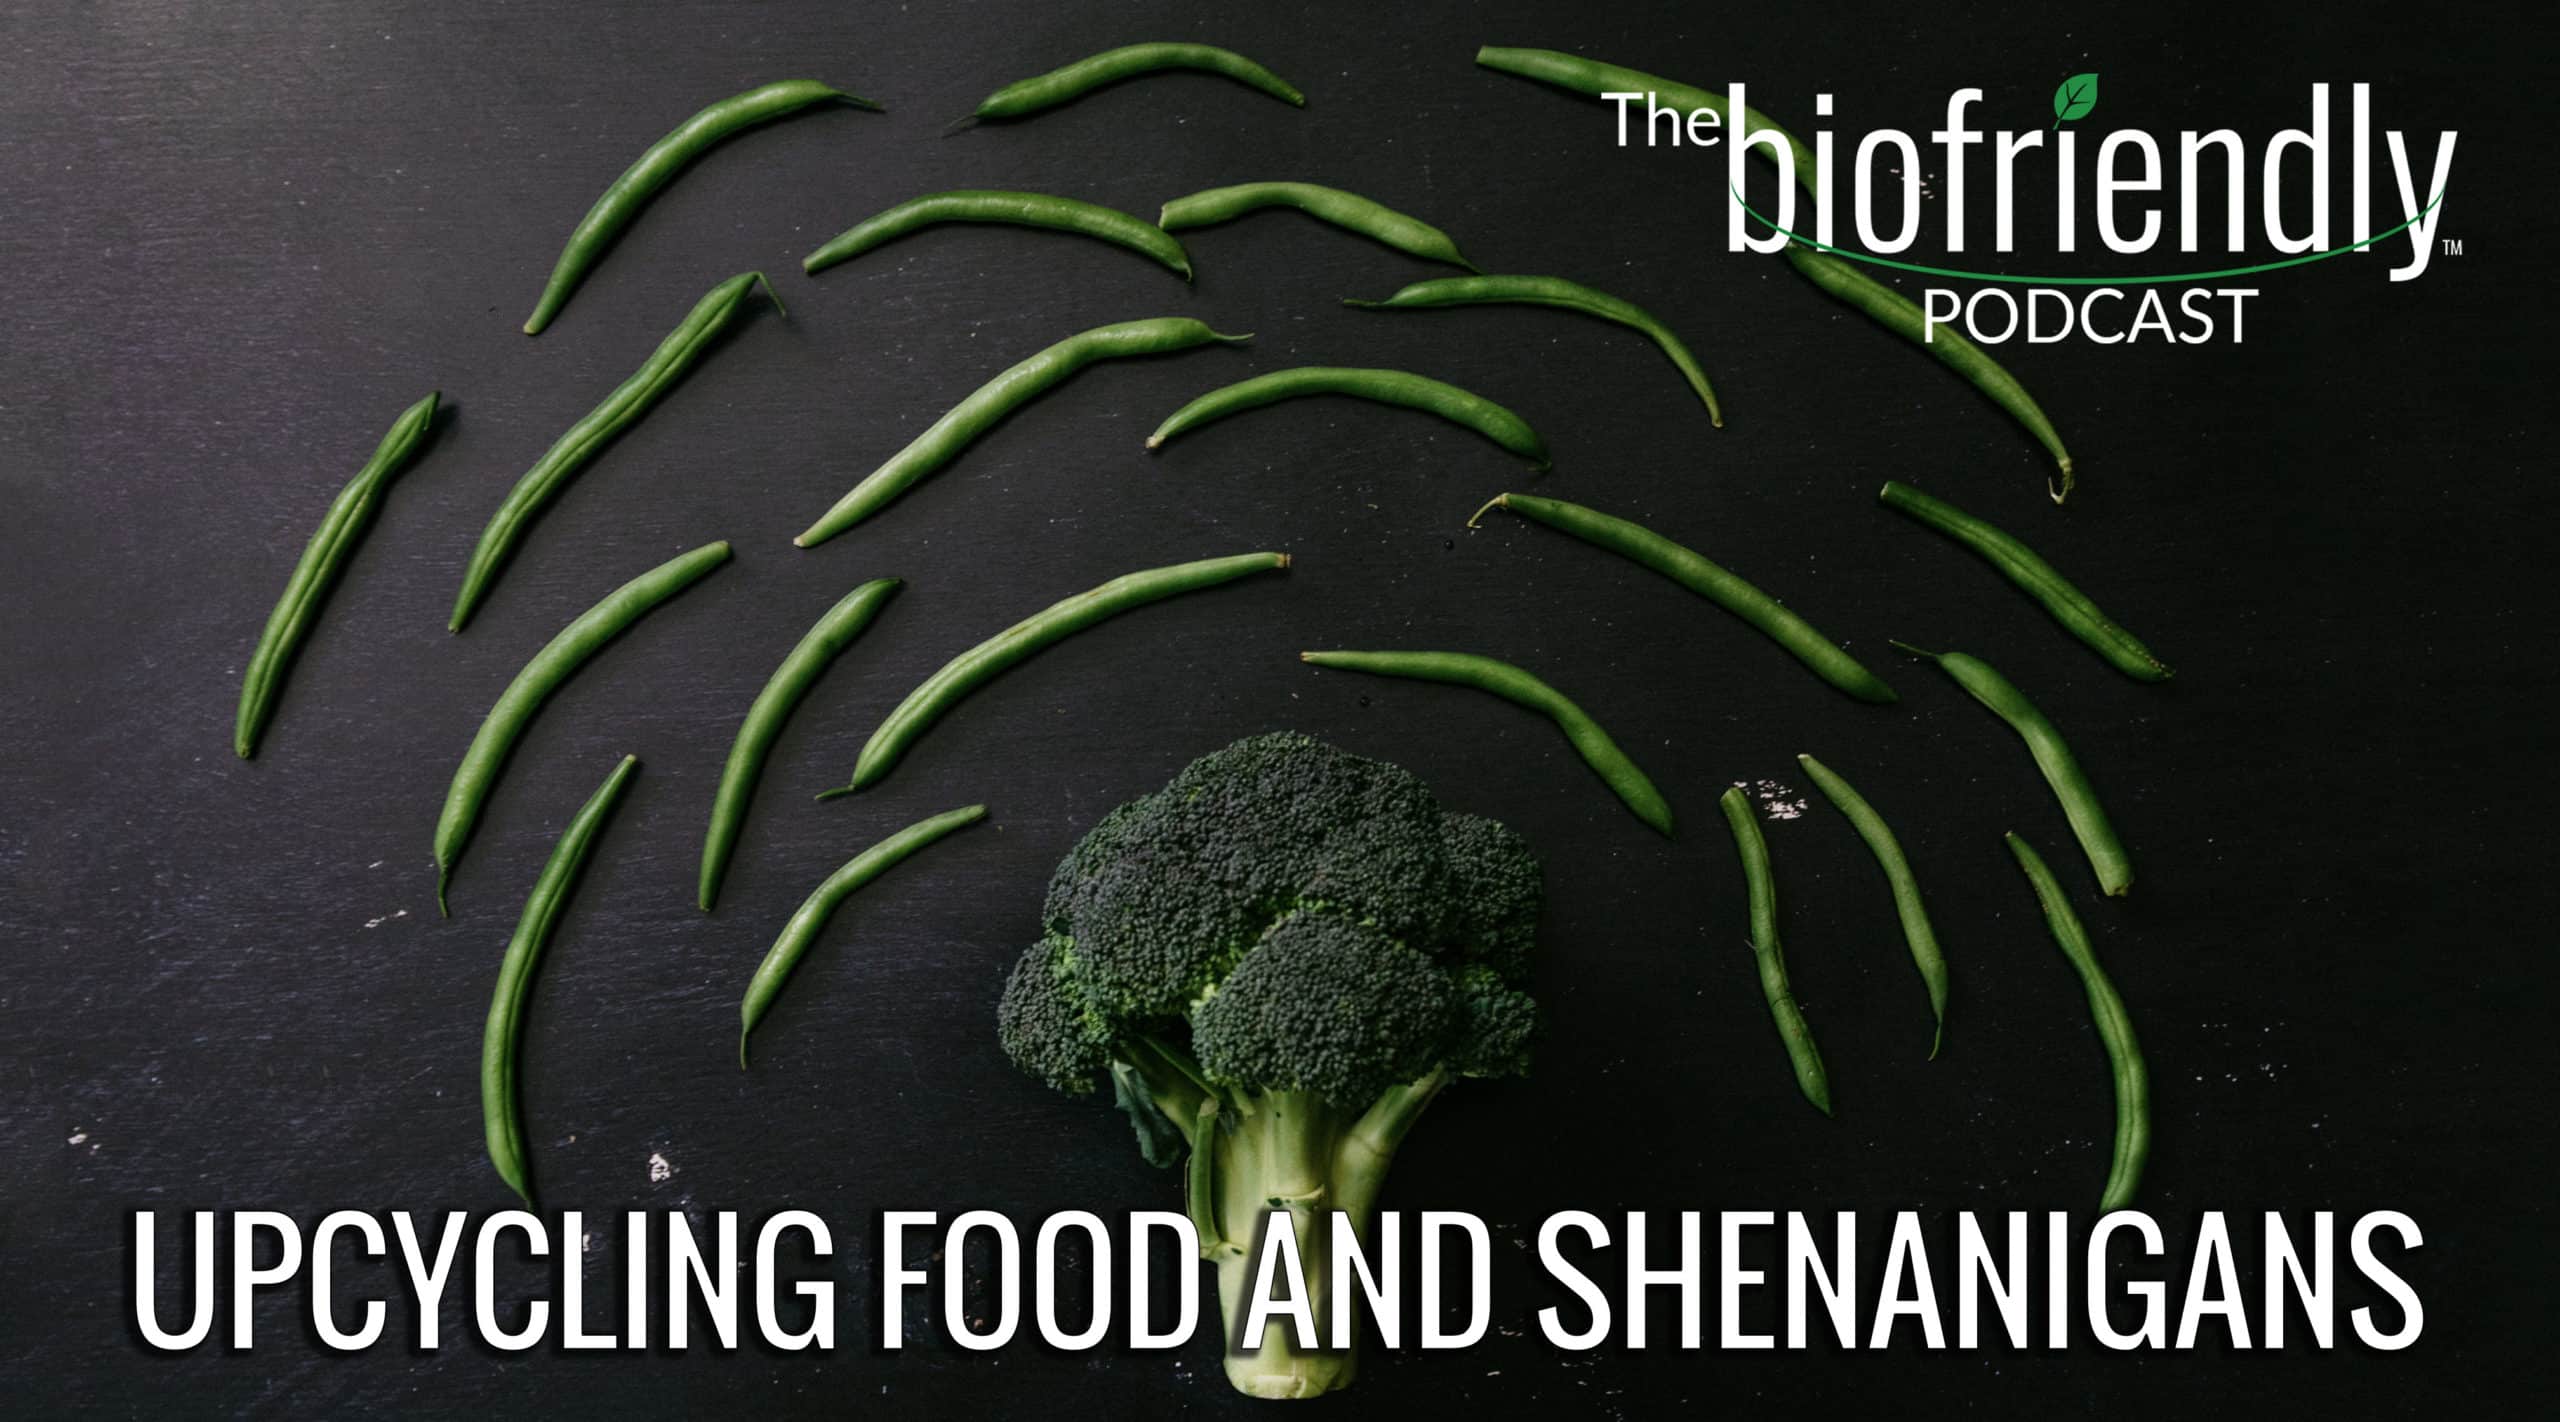 The Biofriendly Podcast - Episode 65 - Upcycled Food and Shenanigans